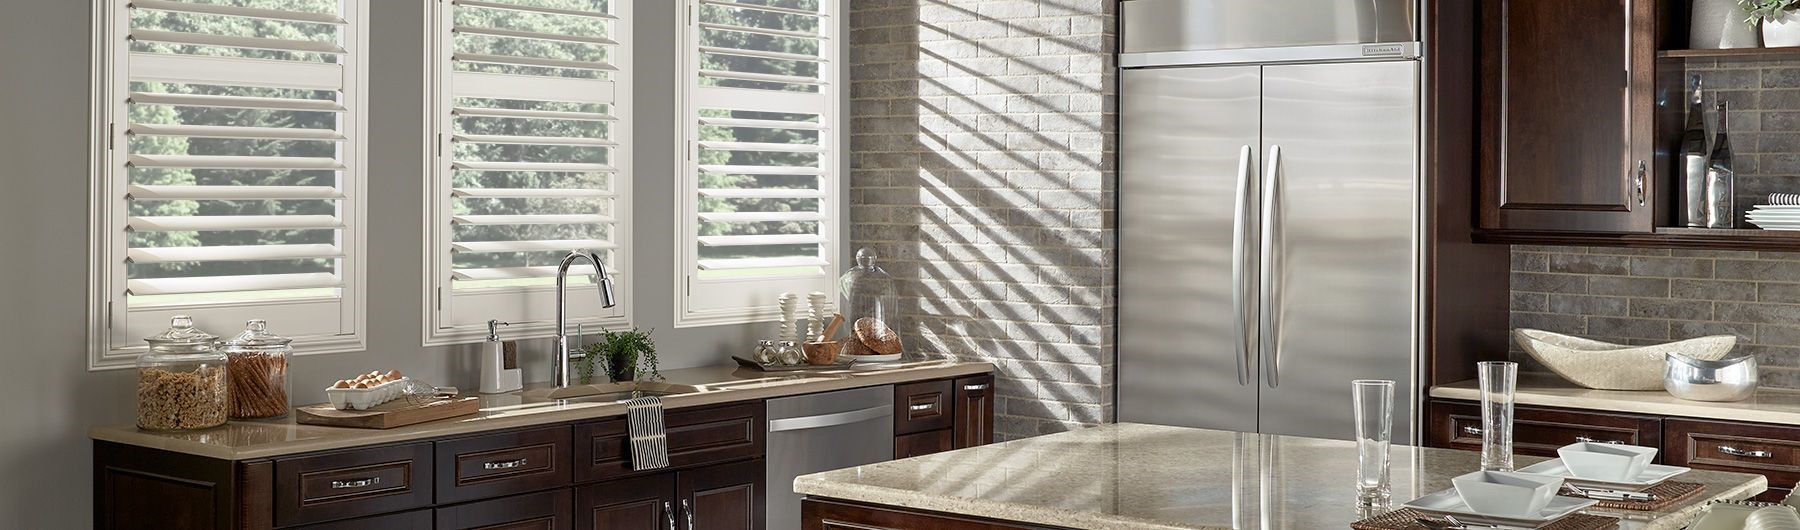 Highlight your Window with Shutter & Blinds in Oakville